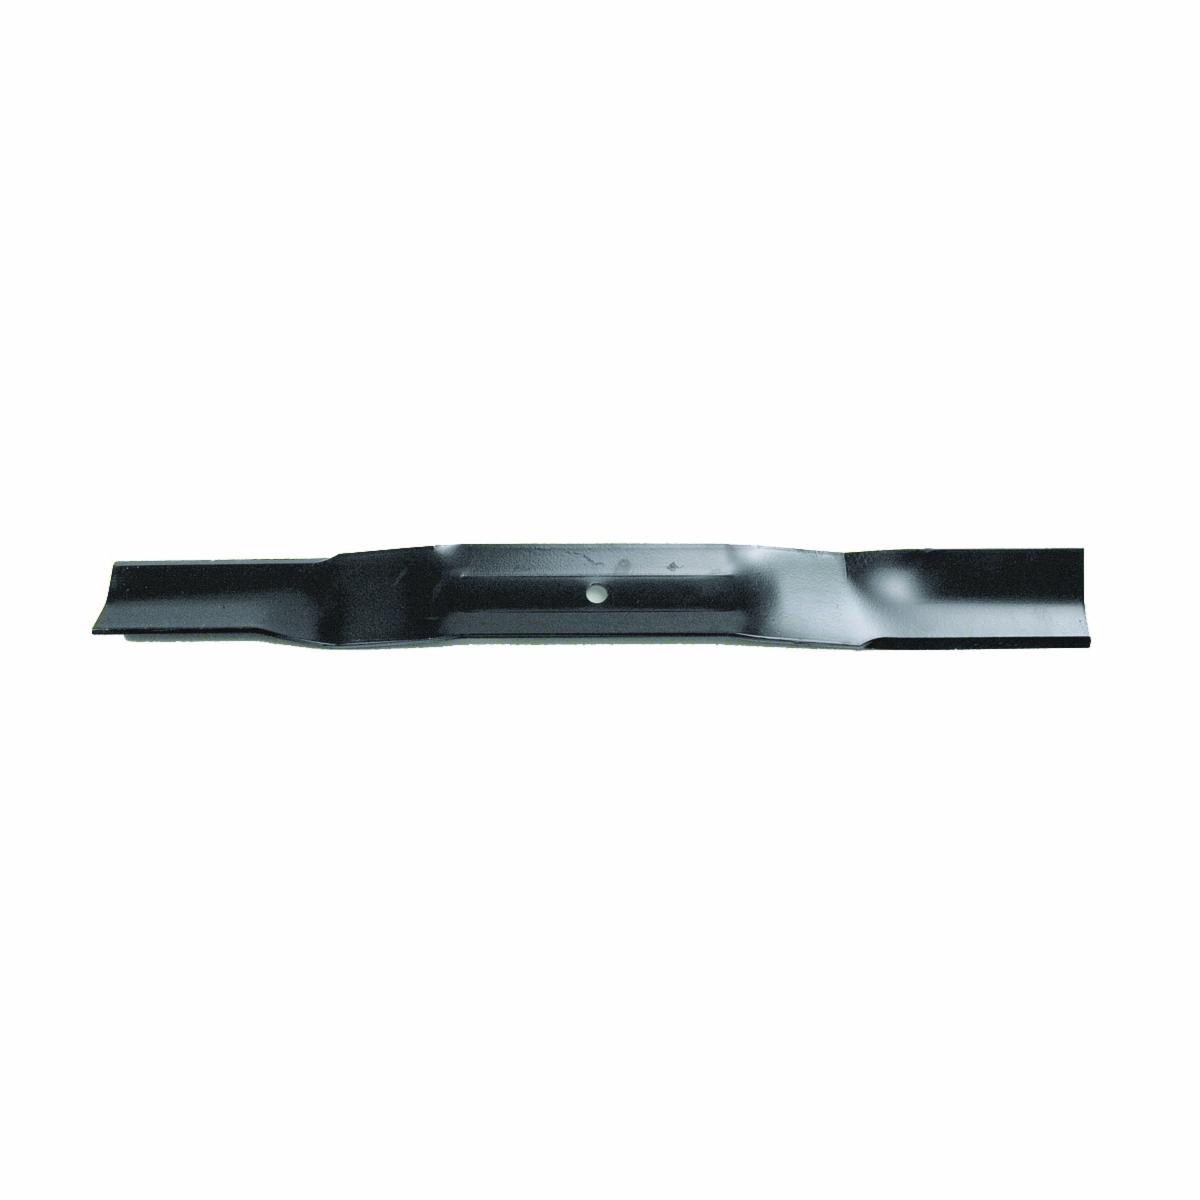 490-100-0035 Lawn Mower Blade, 22 in L, 2-1/4 in W, For: Toro Models Equipped with 22 in Mowing Deck